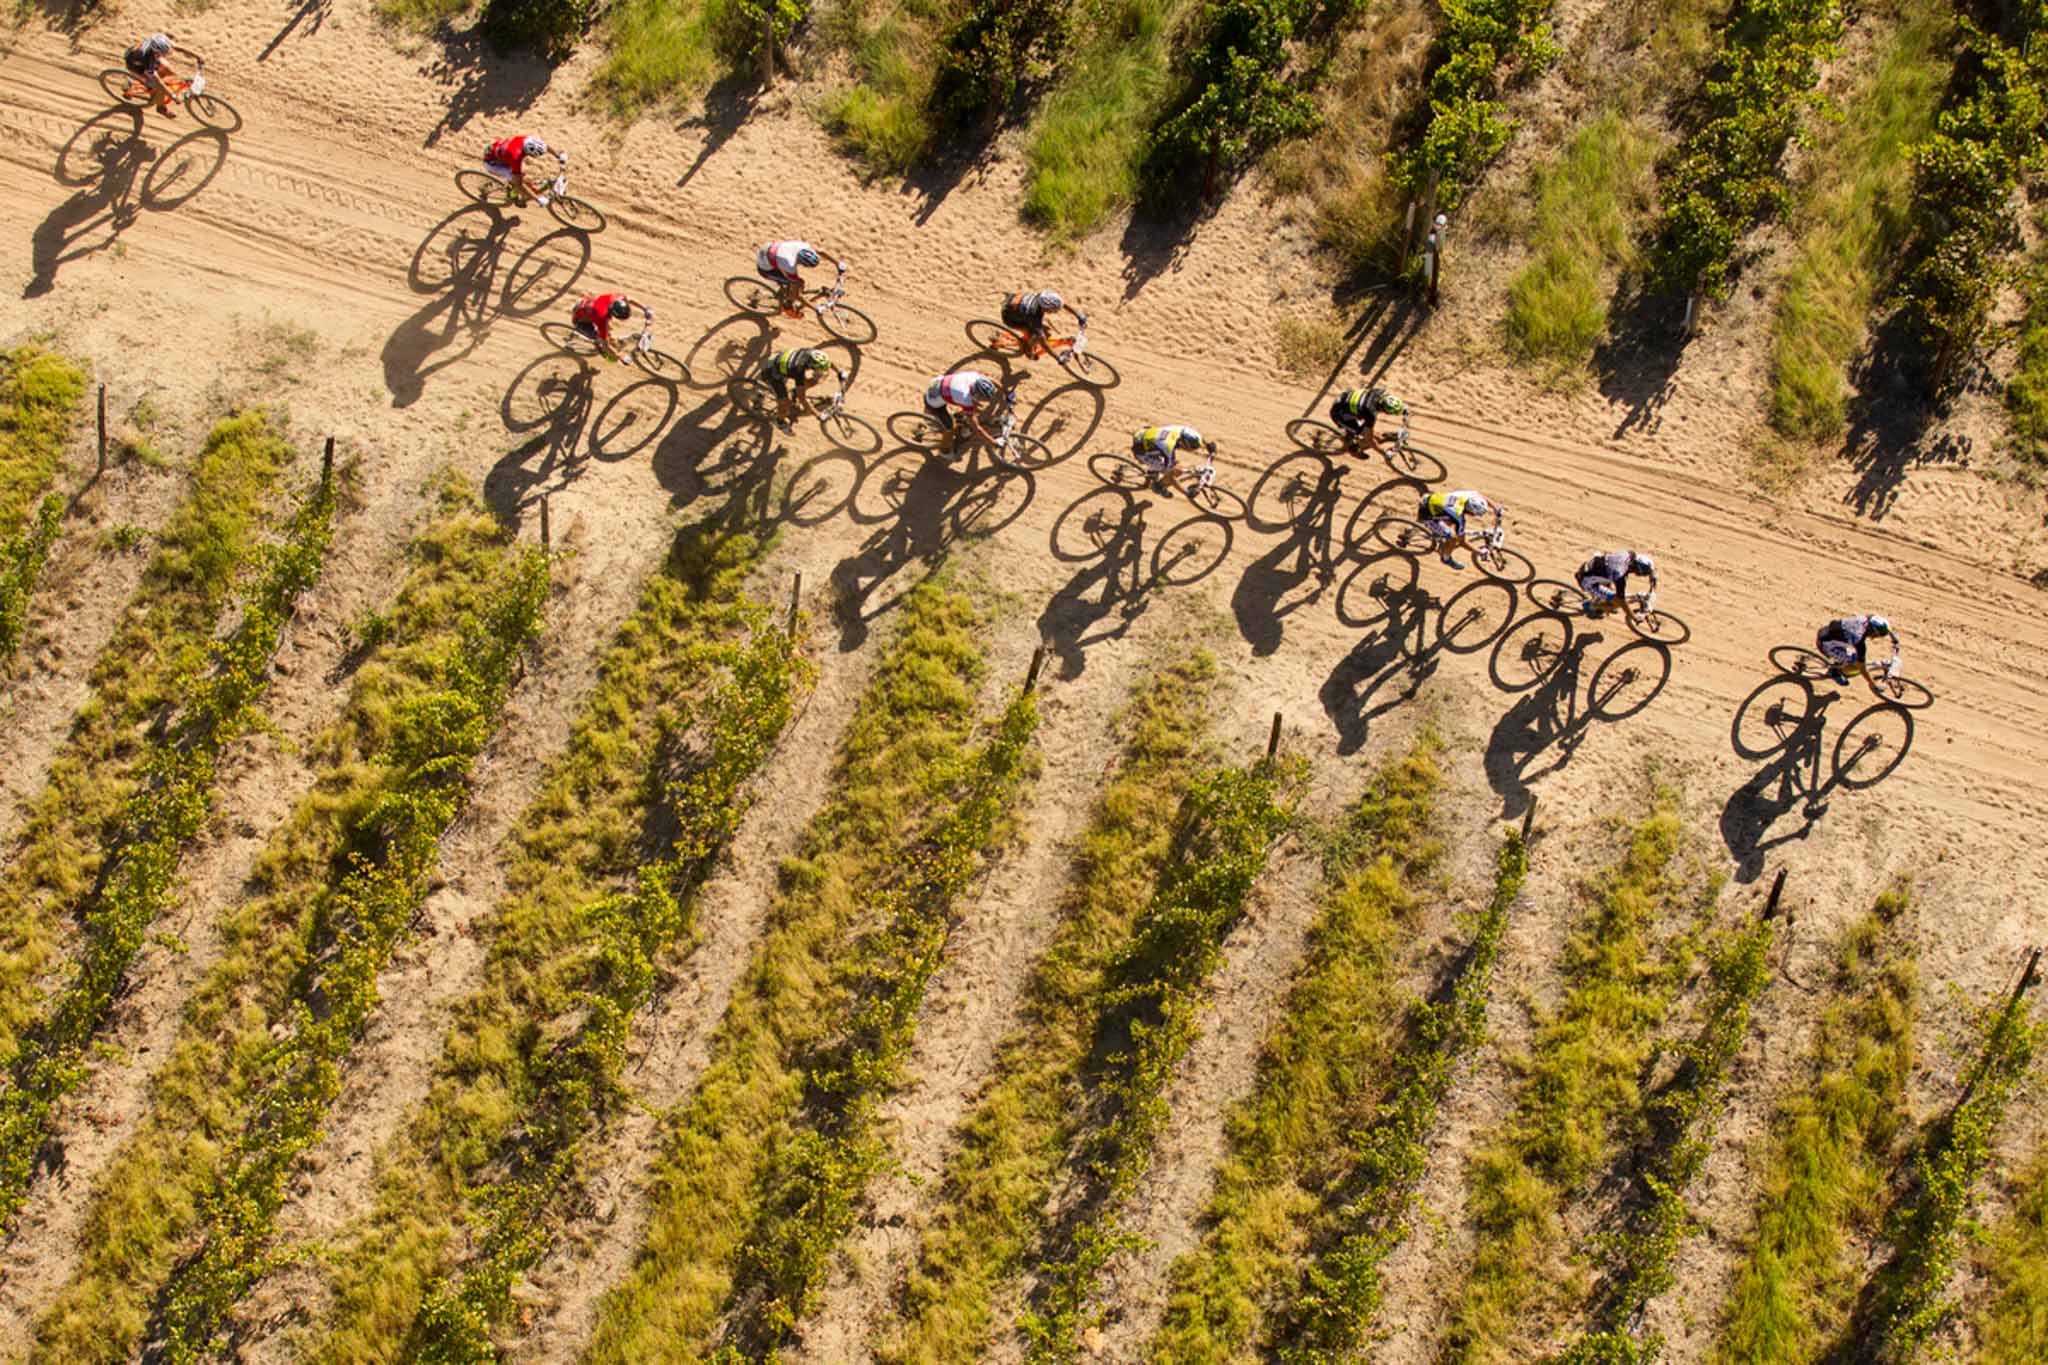 The lead bunch during stage 3 of the 2016 Absa Cape Epic Mountain Bike stage race held from Saronsberg Wine Estate in Tulbagh to the Cape Peninsula University of Technology in Wellington, South Africa on the 16th March 2016 Photo by Gary Perkin/Cape Epic/SPORTZPICS PLEASE ENSURE THE APPROPRIATE CREDIT IS GIVEN TO THE PHOTOGRAPHER AND SPORTZPICS ALONG WITH THE ABSA CAPE EPIC ace2016